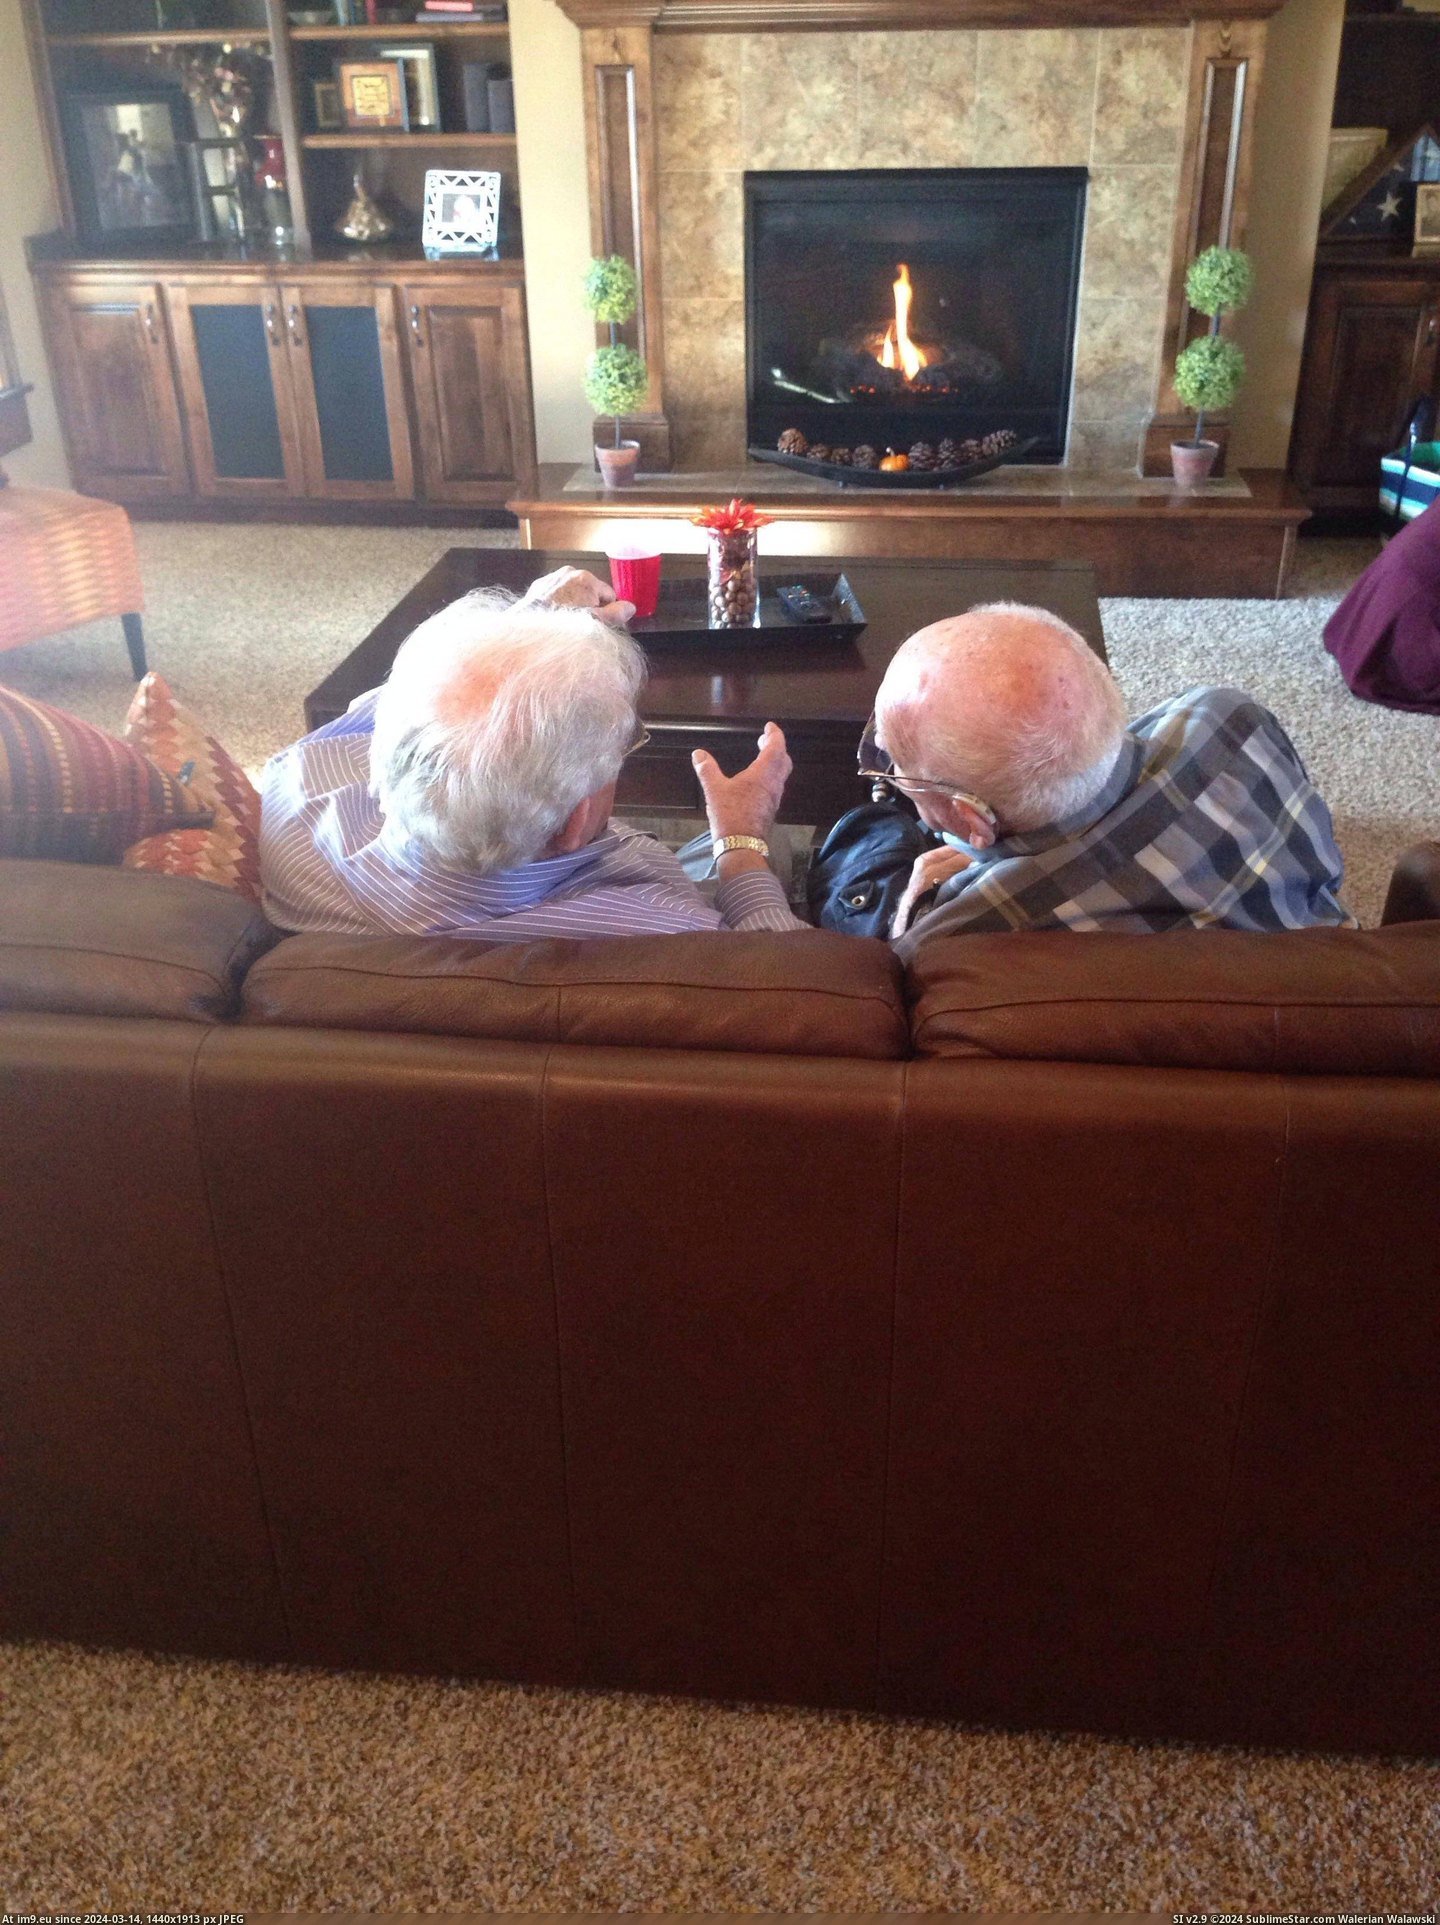 #Year #Old #Thanksgiving #Reminiscing #Brother #Grandpa [Aww] My 87 year old Grandpa and his 92 year old brother reminiscing on Thanksgiving. Pic. (Изображение из альбом My r/AWW favs))